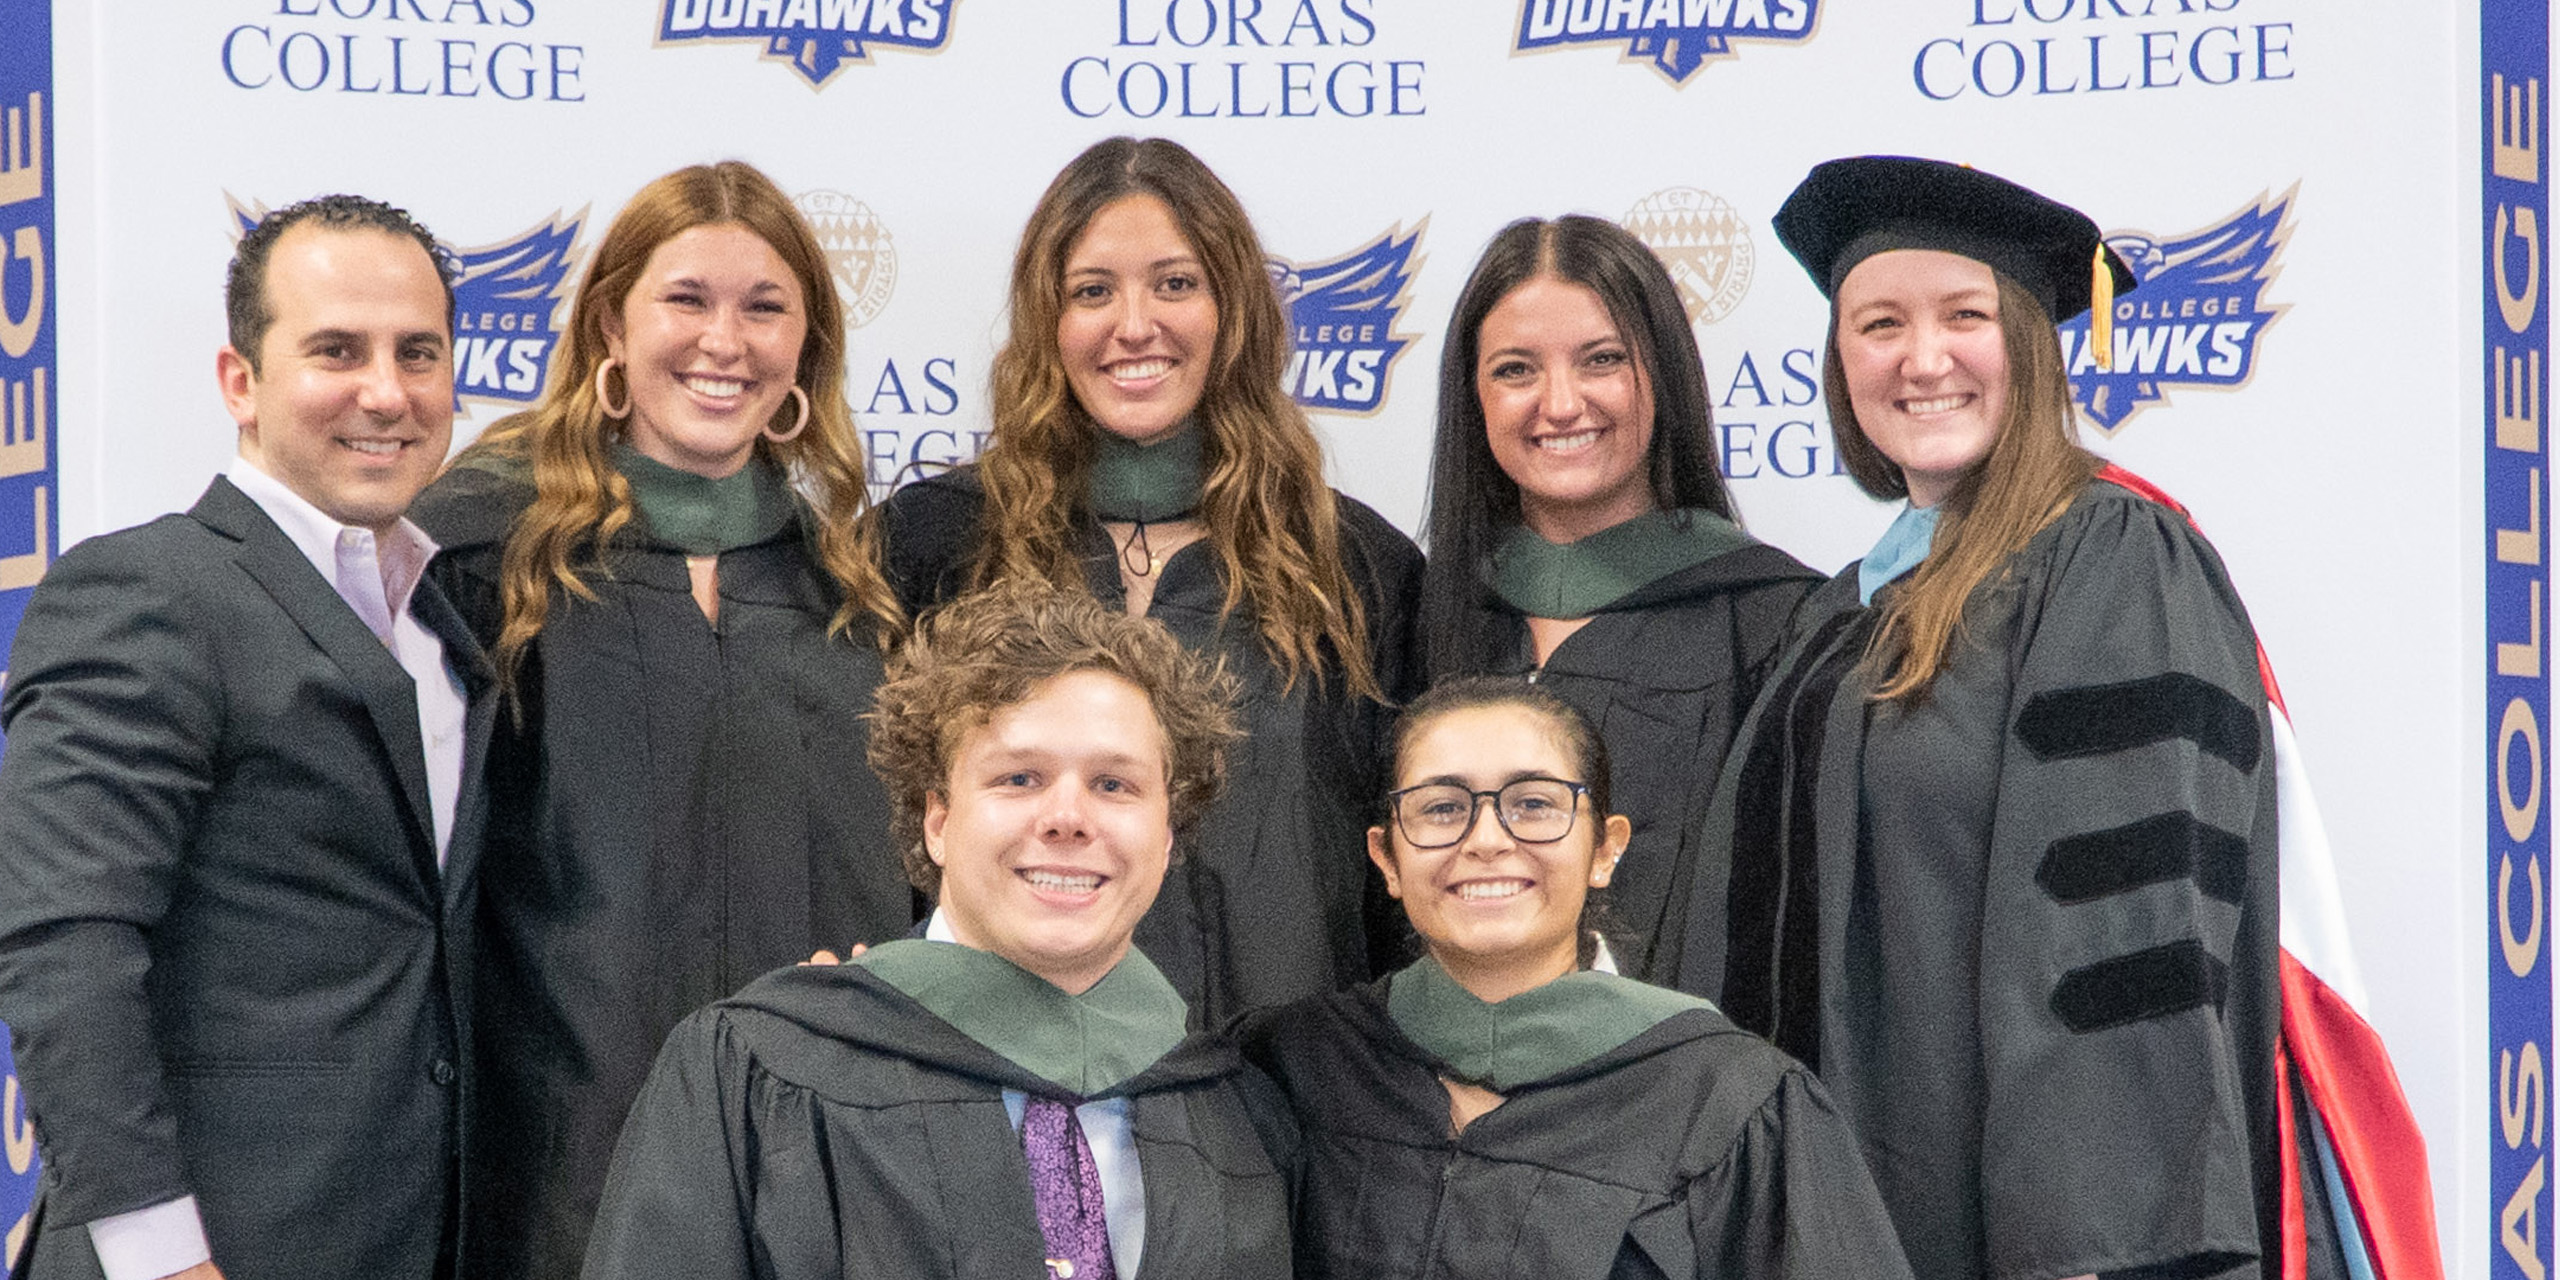 Loras Master's Program Students At The Commencement Event